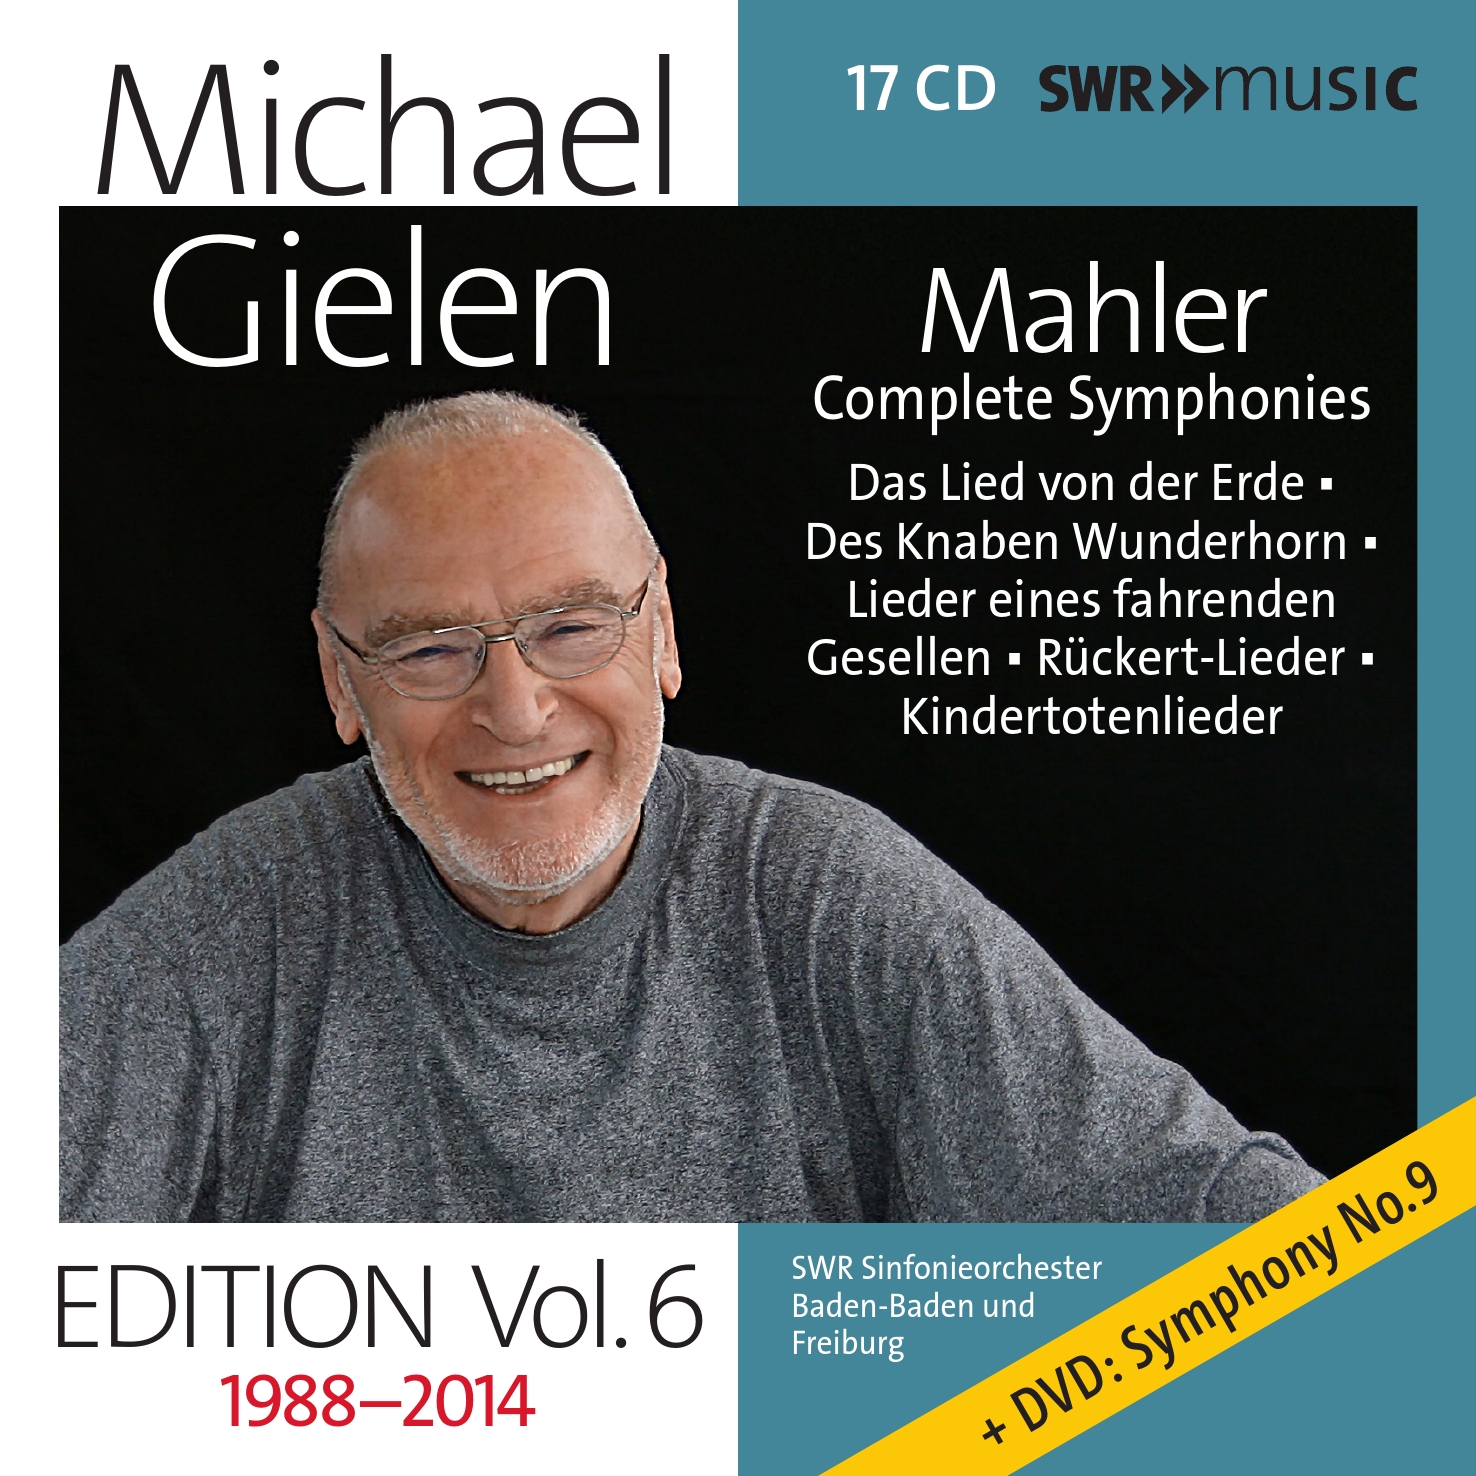 Michael Gielen Ed - Vol 6 Mahler Symphonies and. Song Cycles Recorded 1988-2014 cd09